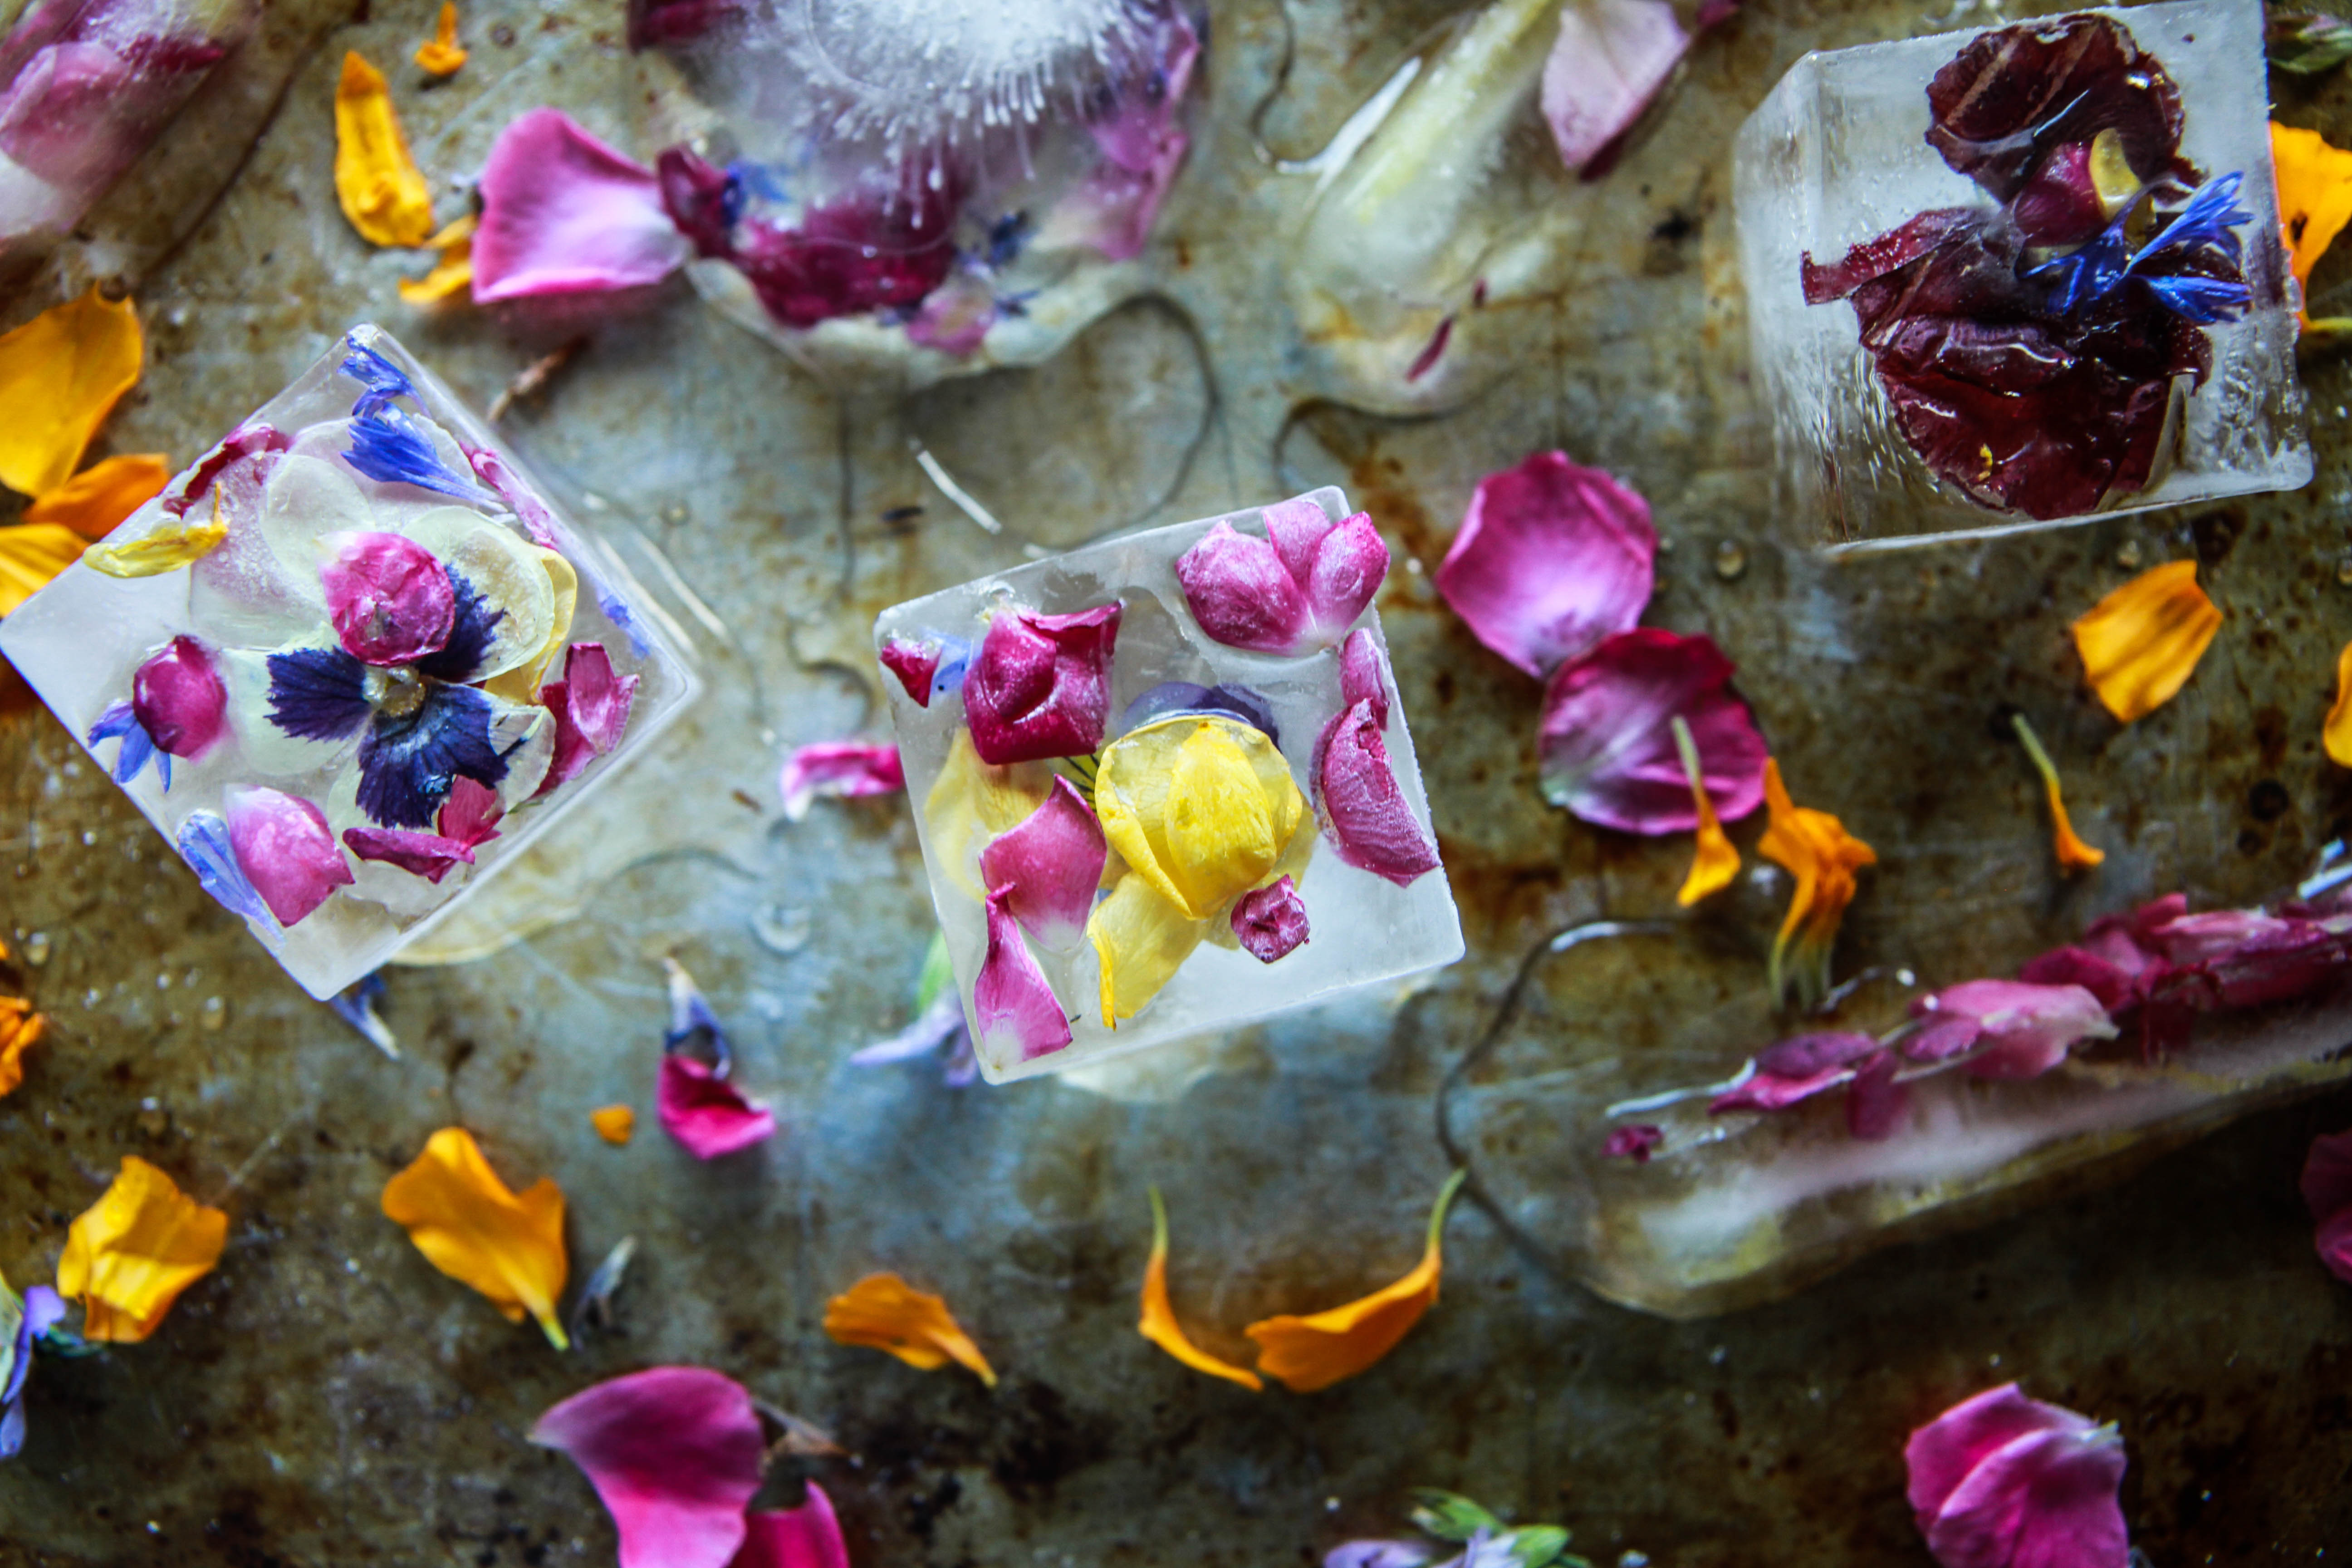 How to Make Edible Flower Ice Cubes - Heather Christo